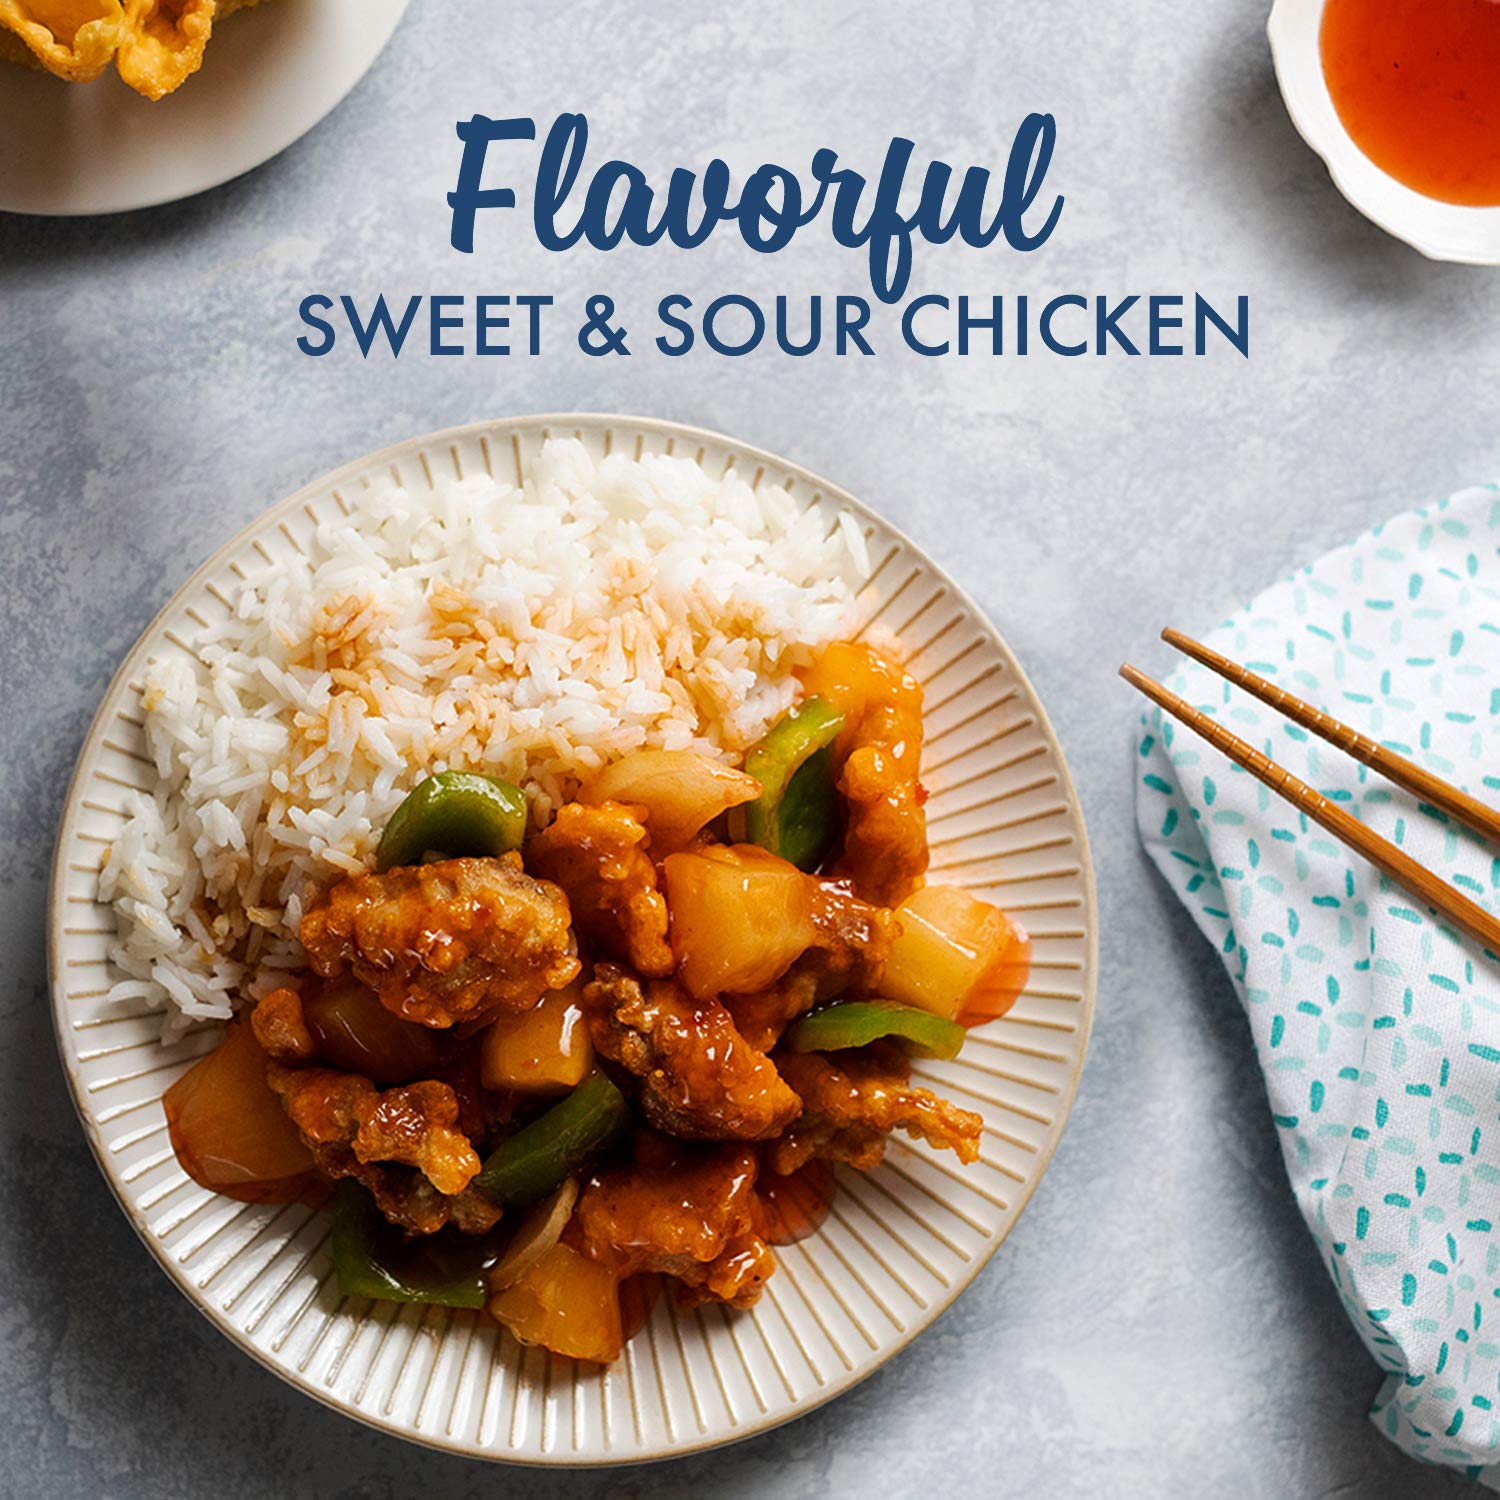 10 Best Sweet and Sour Sauces for Egg Rolls, Meatballs, Chicken & Pork